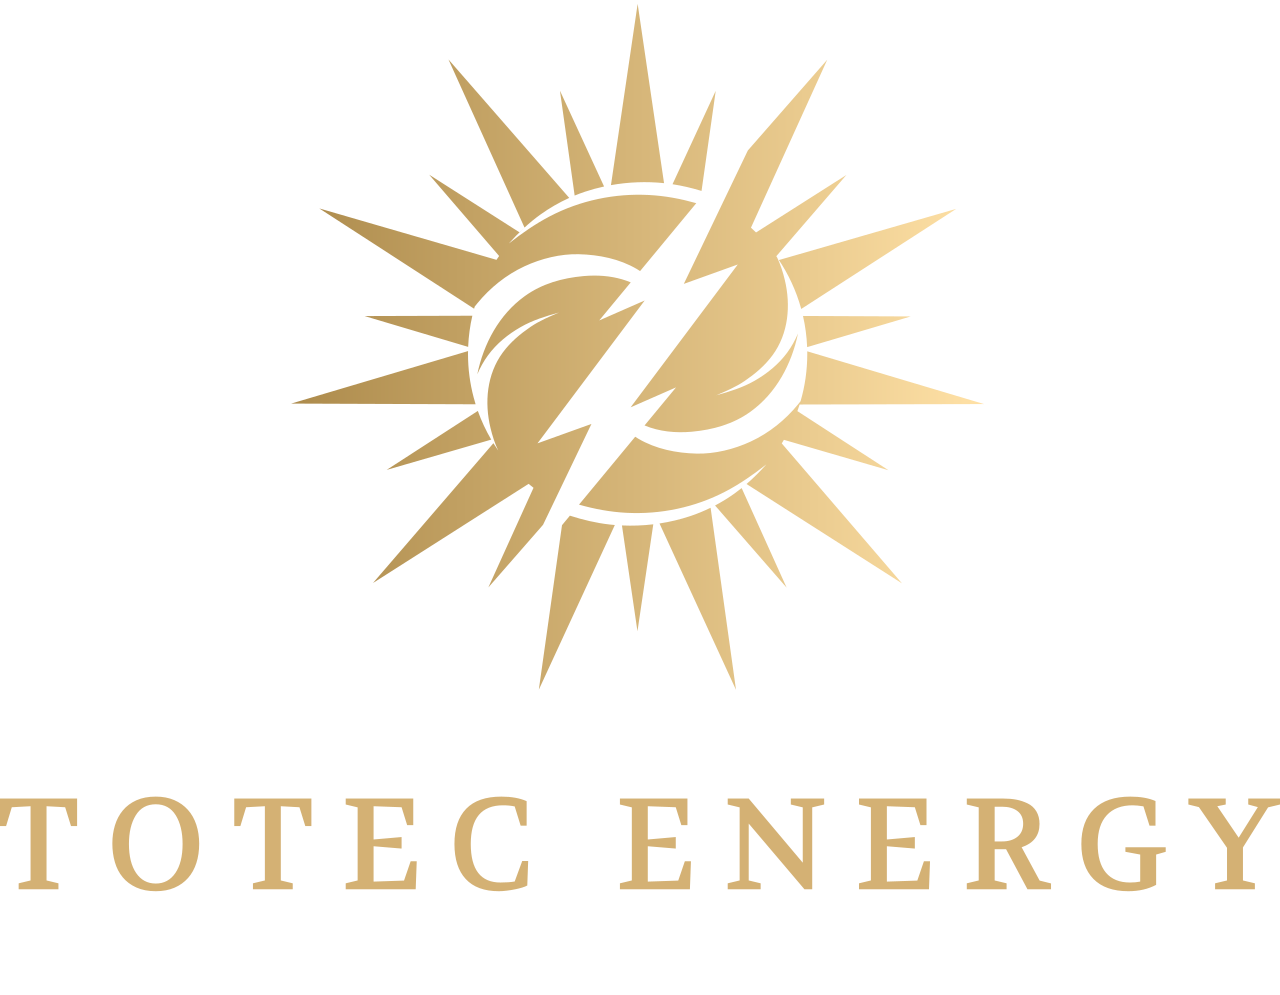 Totec energy's web page